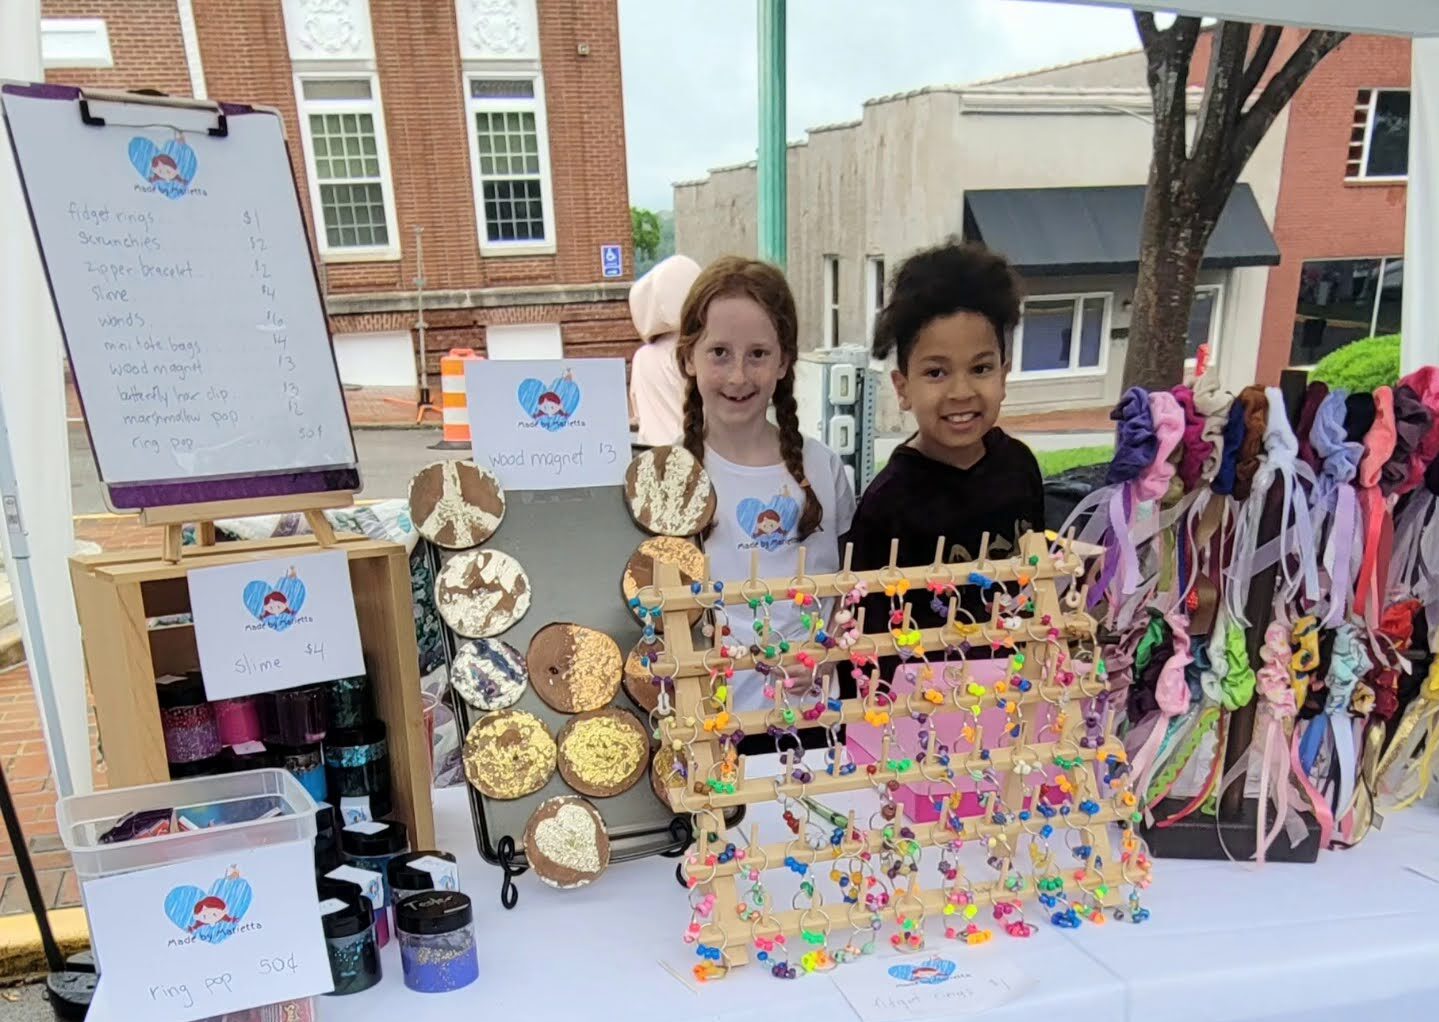 During our market in Clarksville, TN we met up with Marietta, 7, who had a great booth that attracted a lot of attention with her wheel of discounts and prizes.